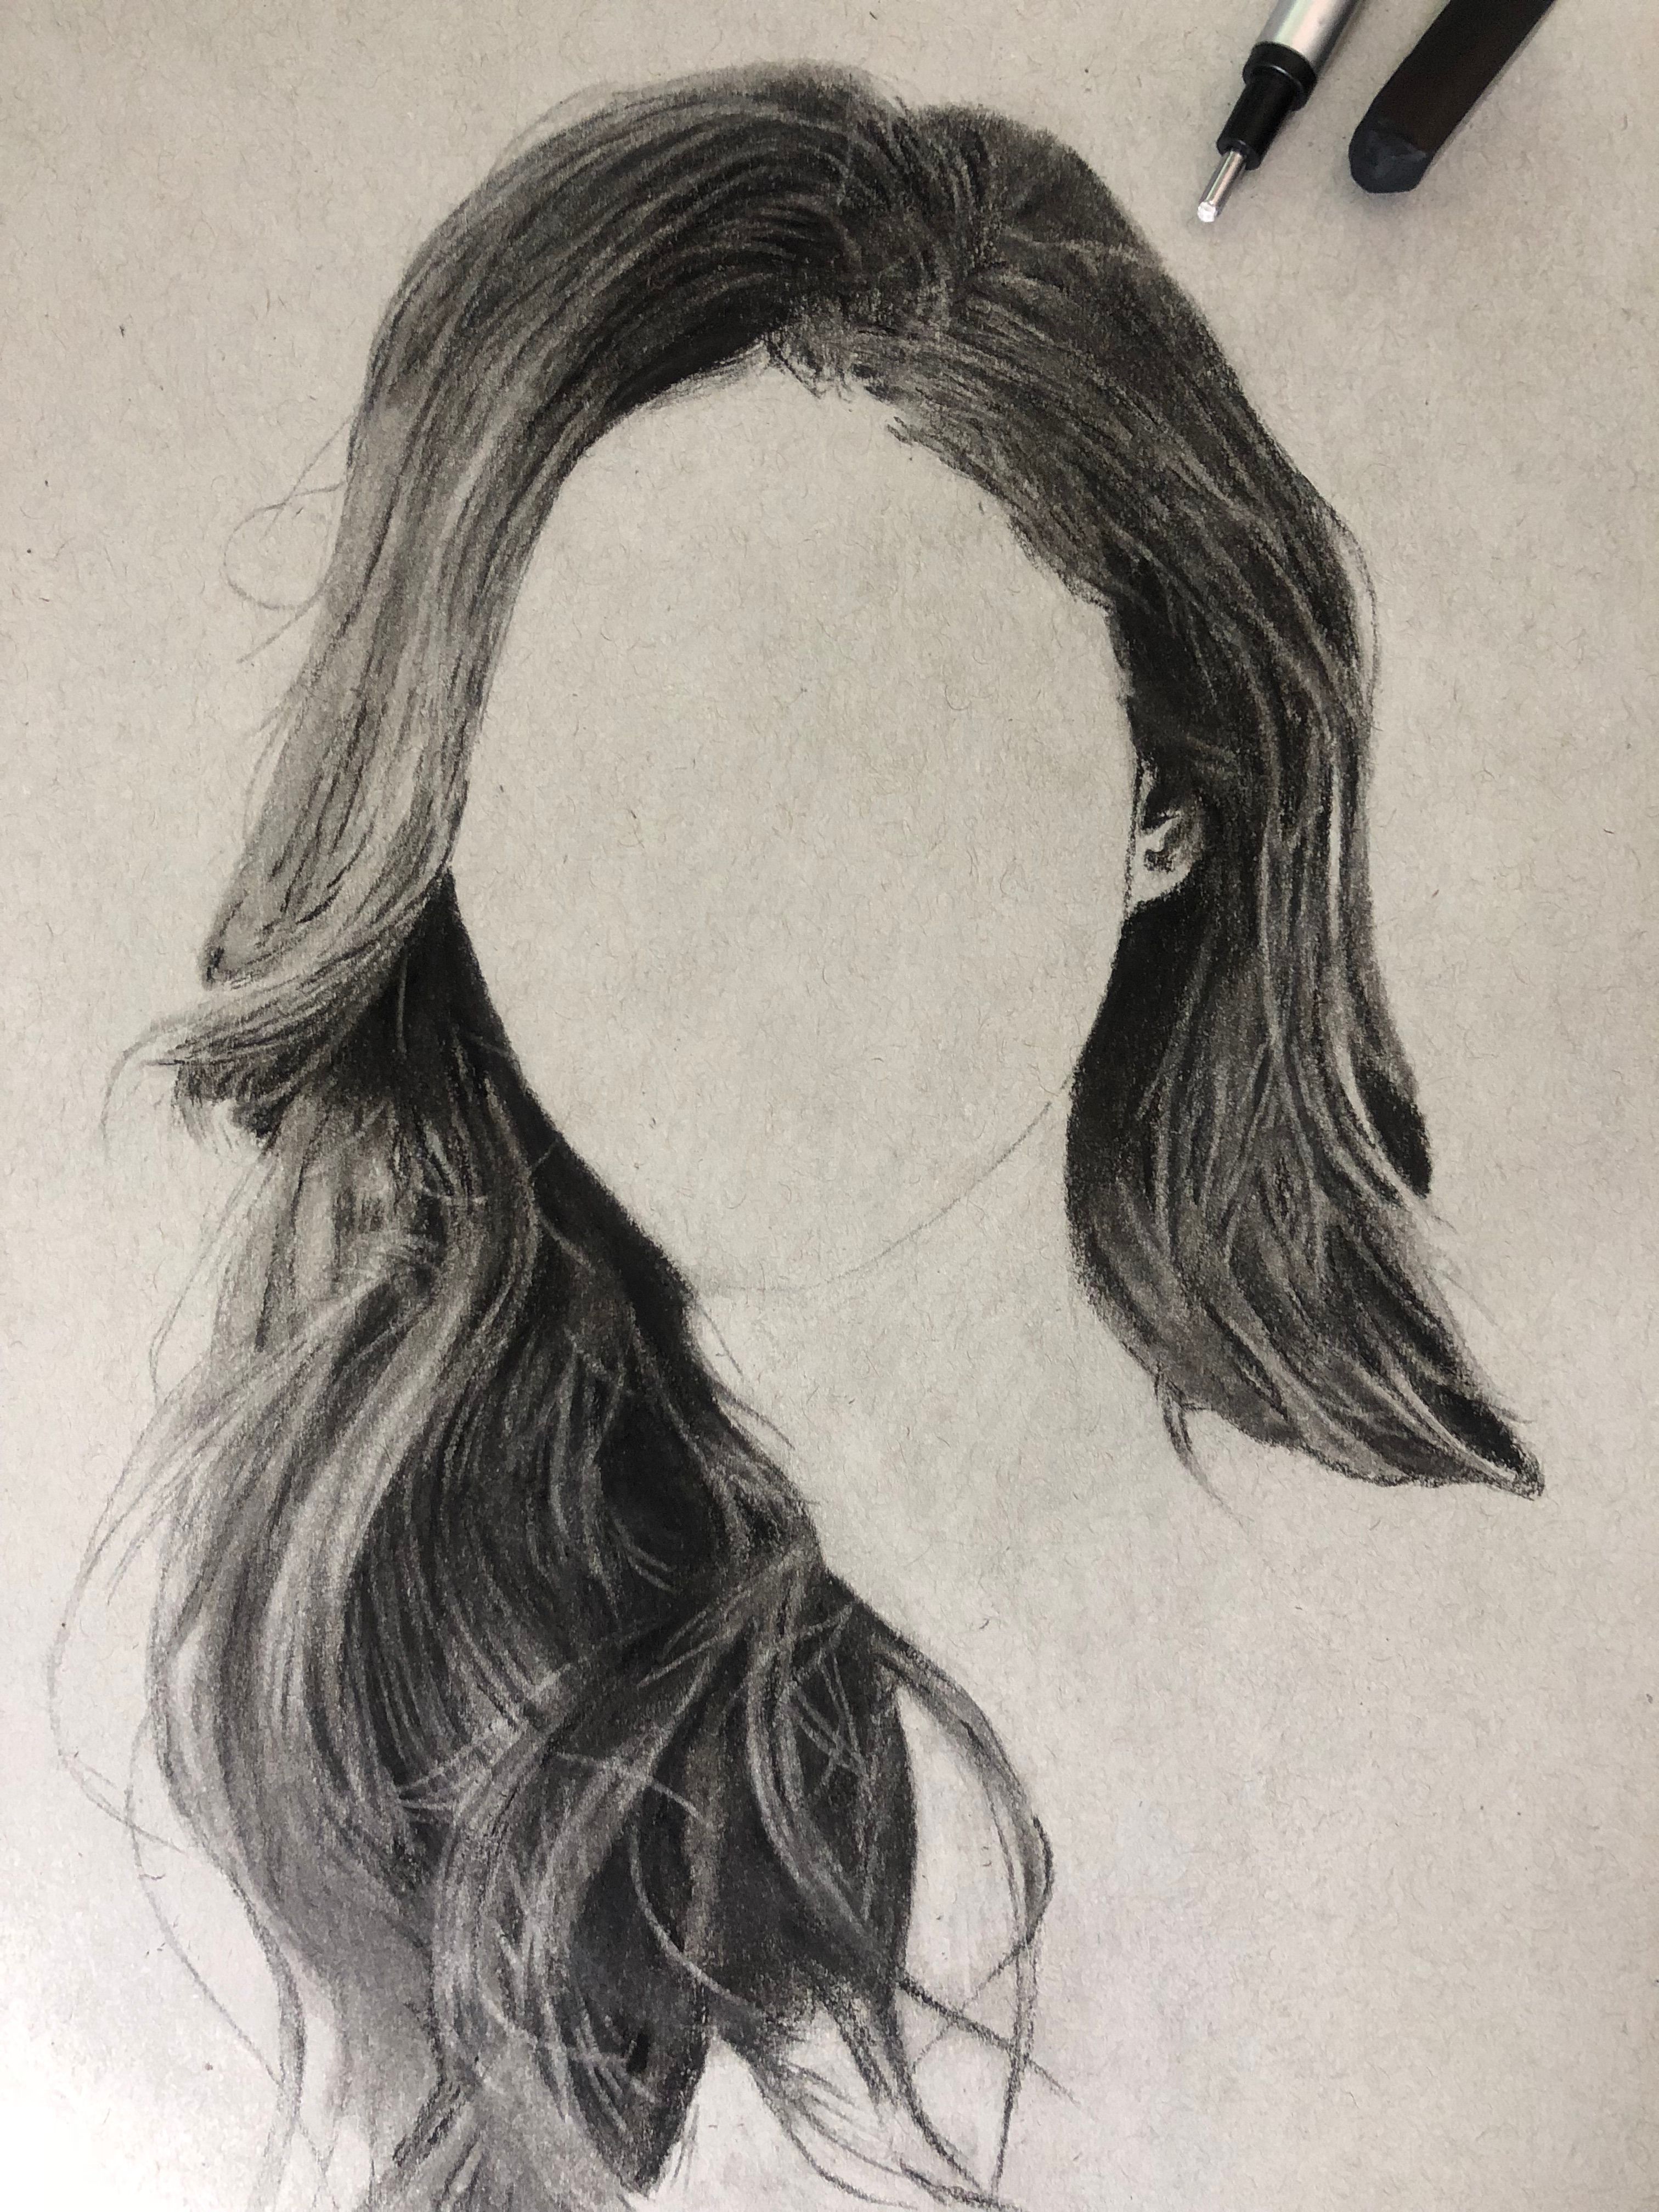 Step-by-Step Guide: How to Draw Hair